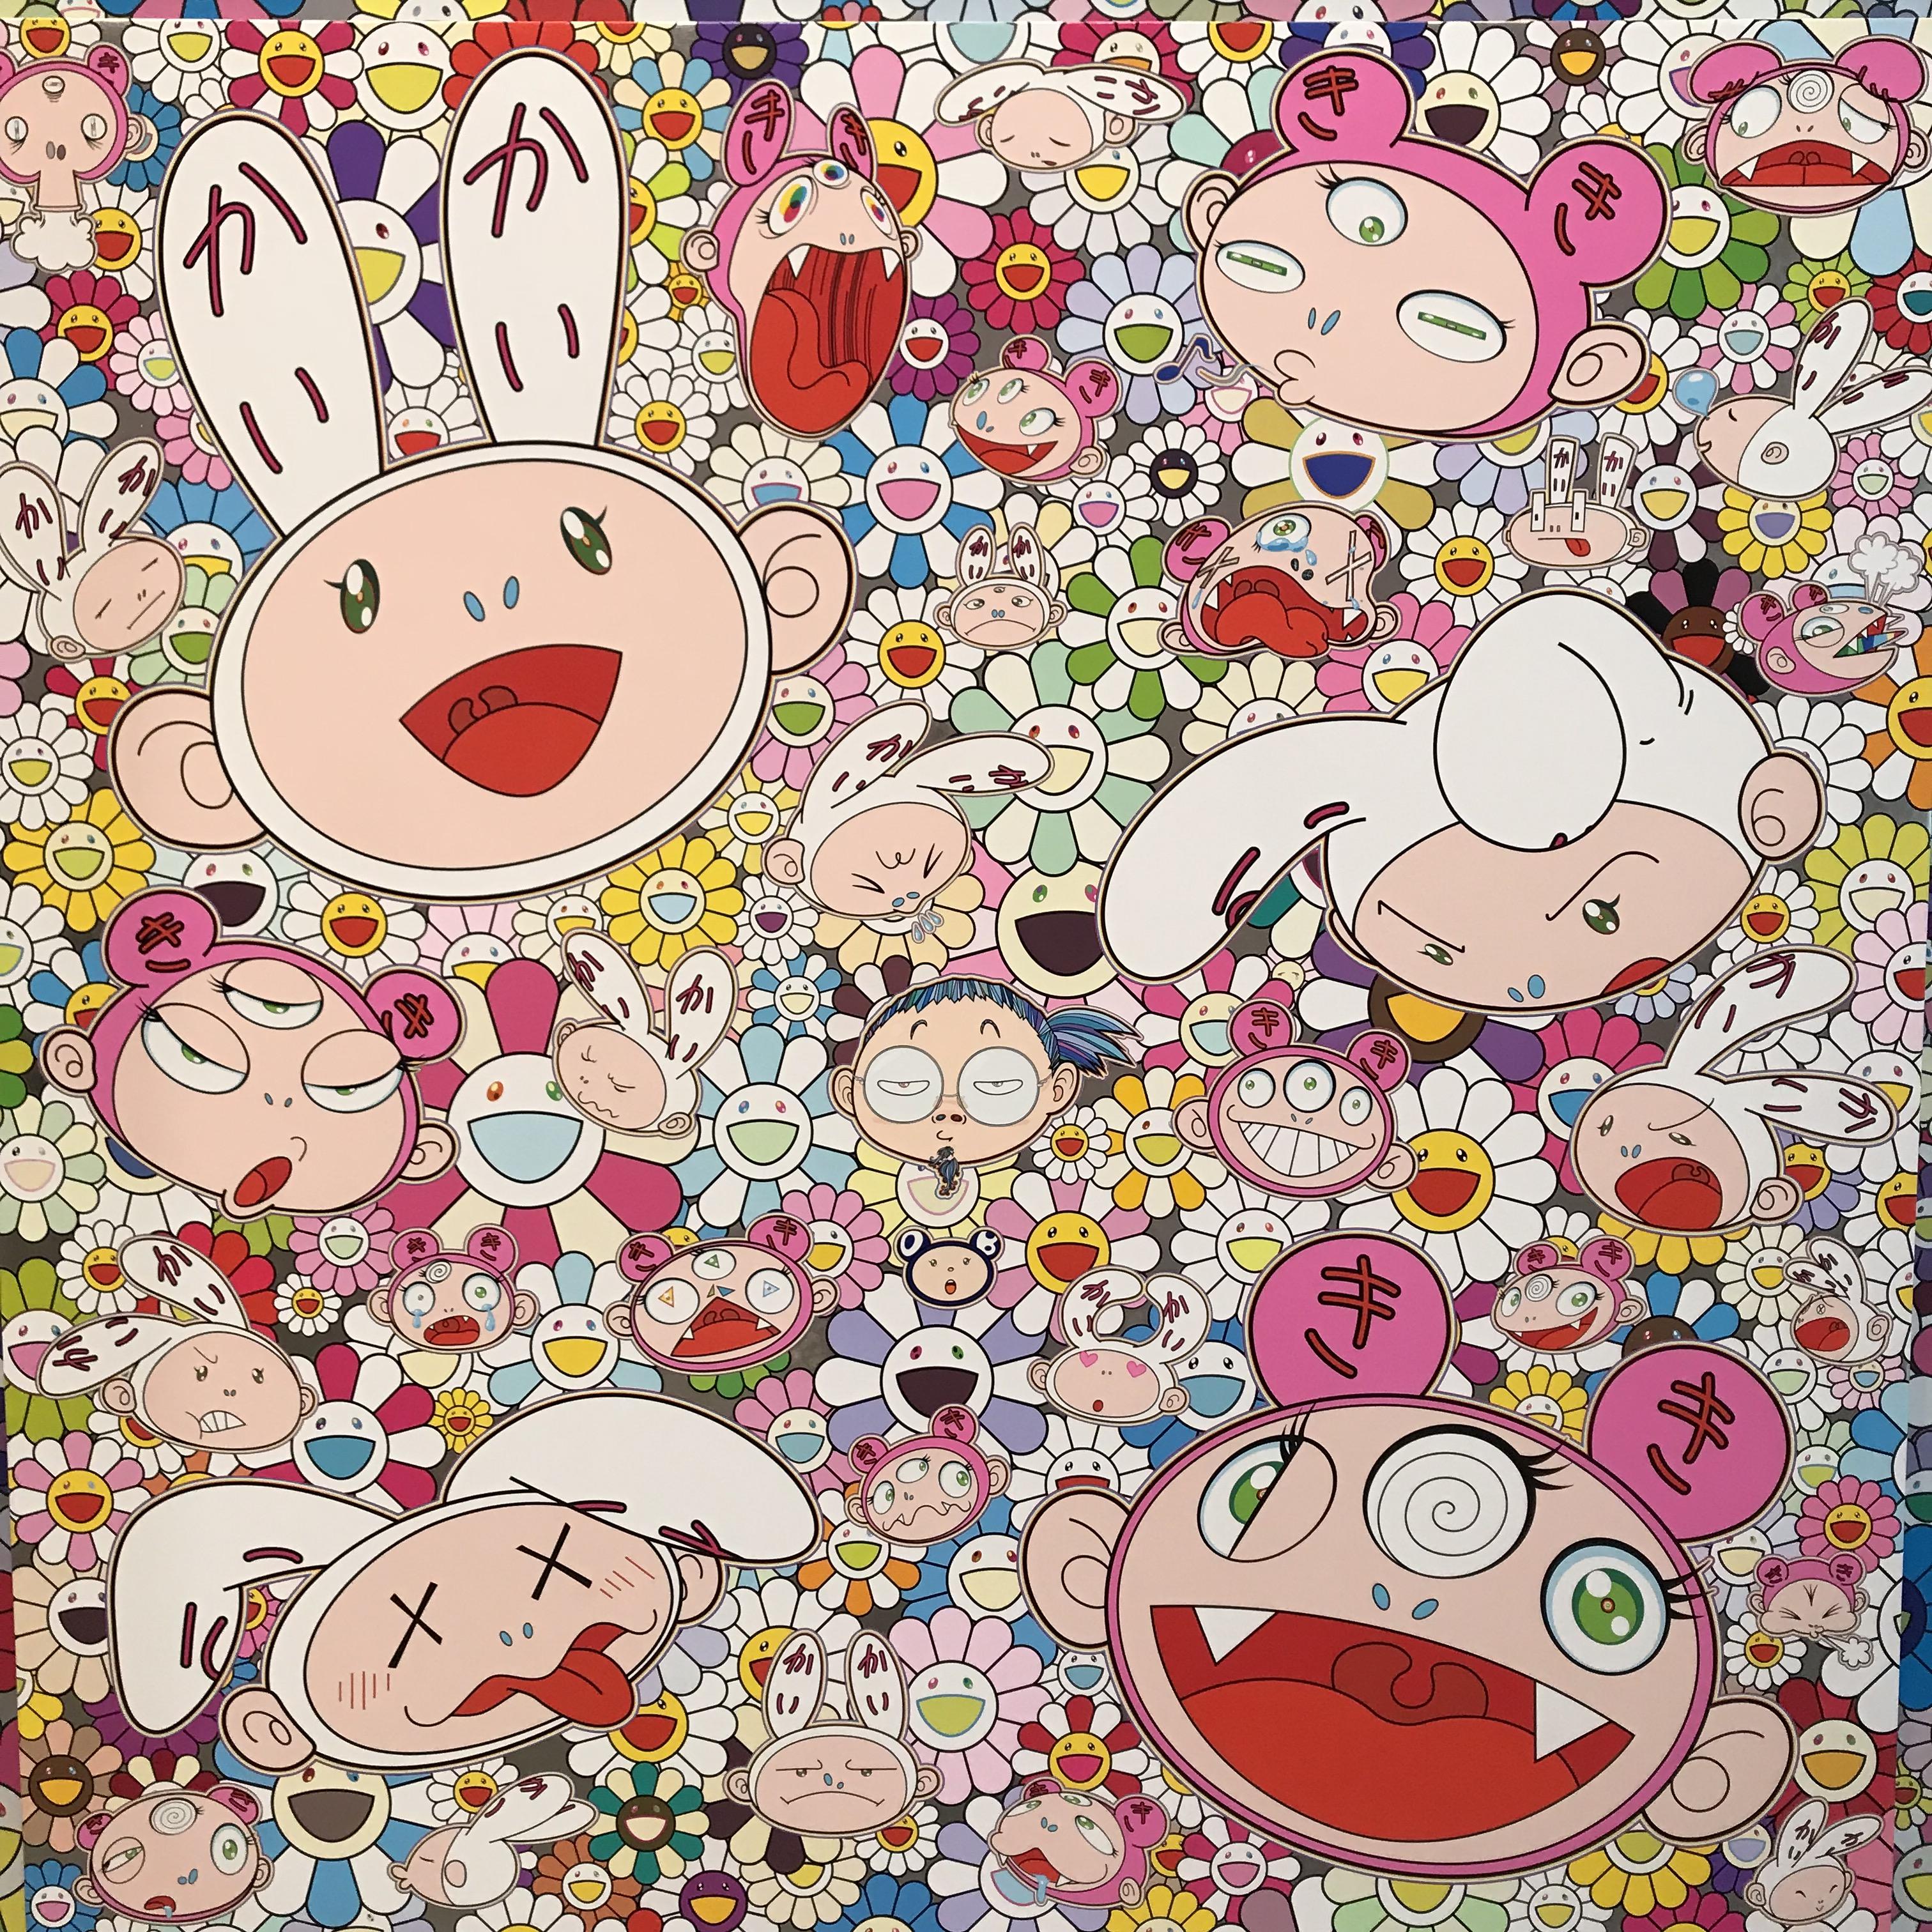 A Picture I Took At The Takashi Murakami Gallery Louis